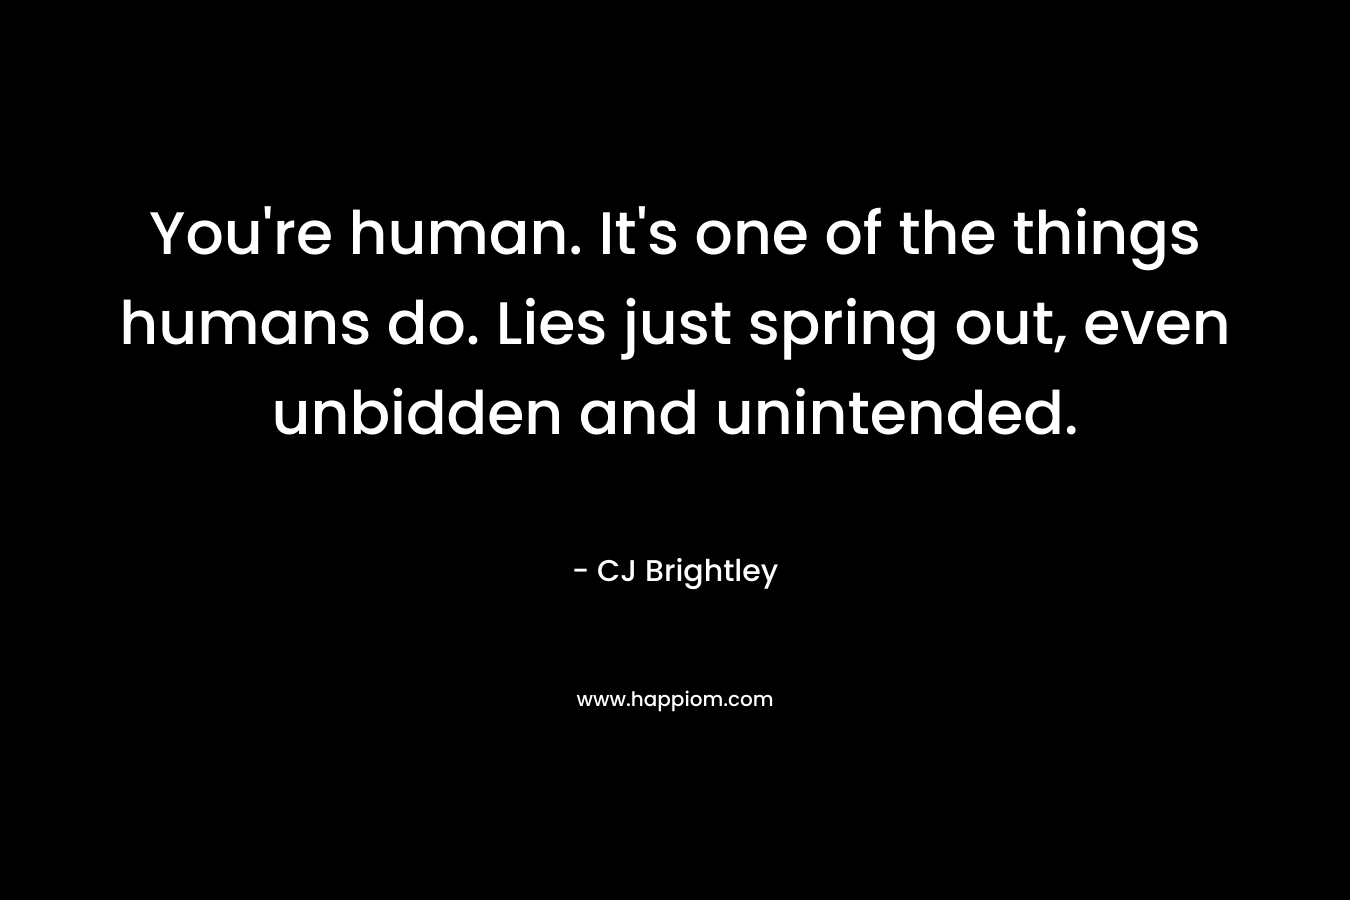 You're human. It's one of the things humans do. Lies just spring out, even unbidden and unintended.